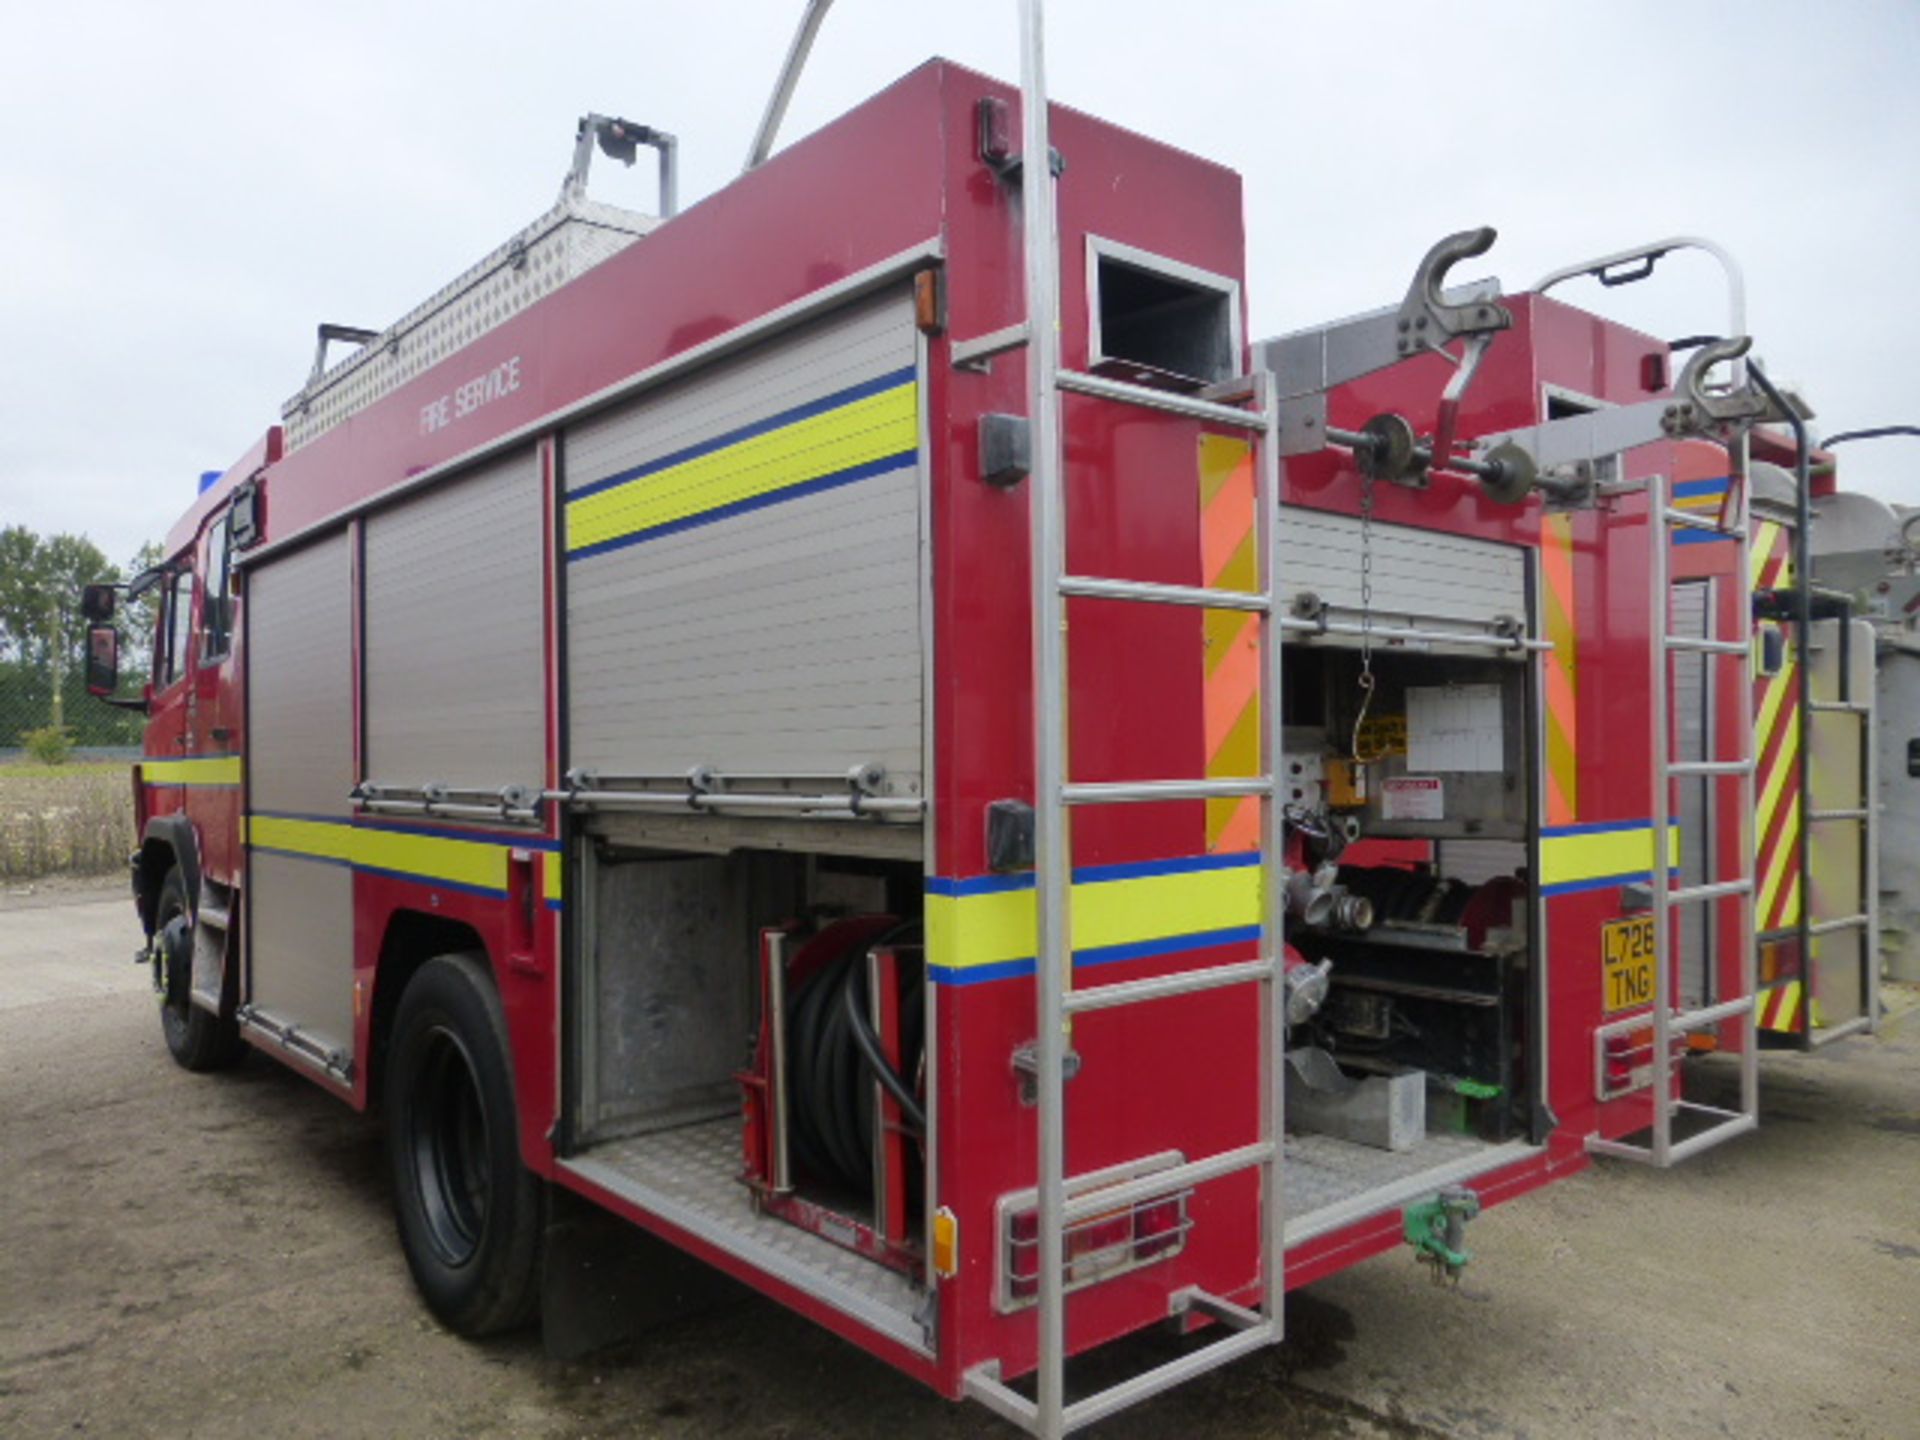 Mercedes 1124 Saxon Fire / Rescue vehicle Fire Engine - Image 2 of 8